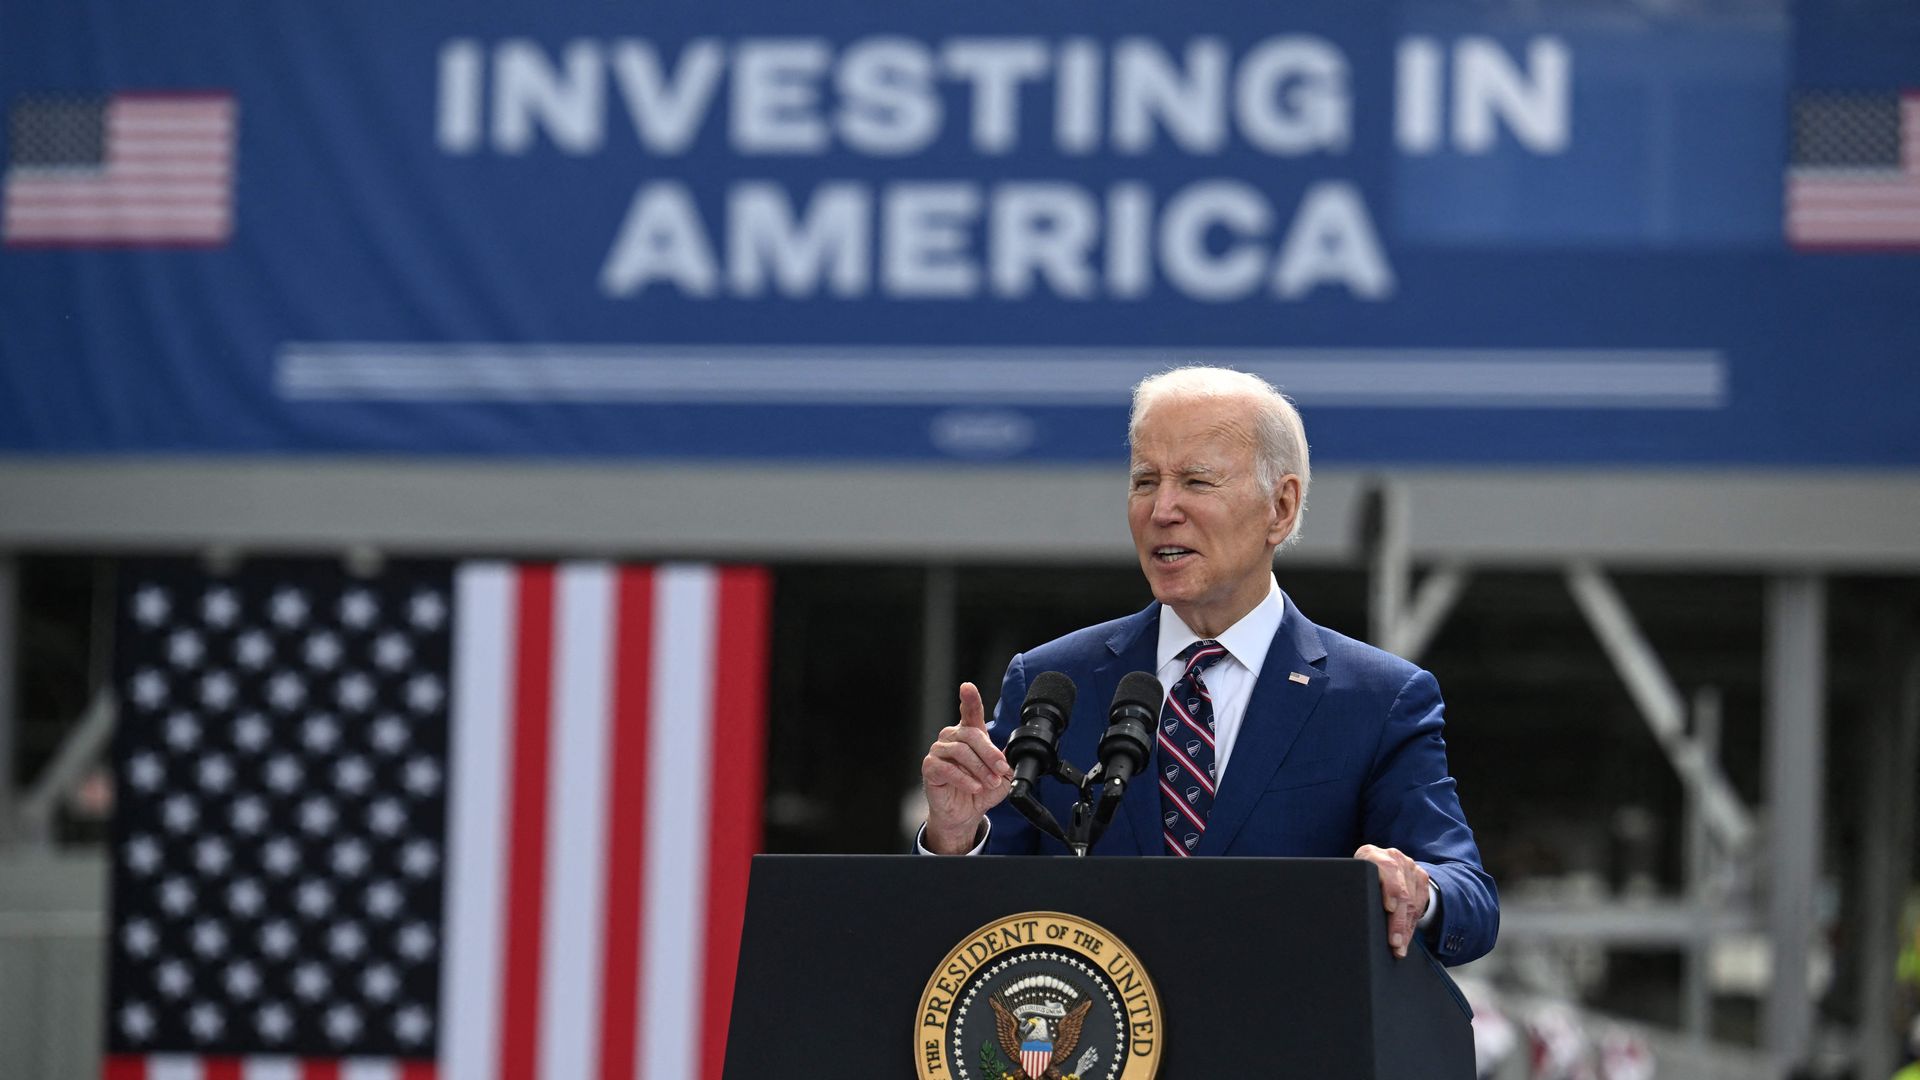 US President Joe Biden delivers remarks at Wolfspeed, a semiconductor manufacturer, in Durham, North Carolina, on March 28, 2023. (Photo by Jim WATSON / AFP) (Photo by JIM WATSON/AFP via Getty Images)